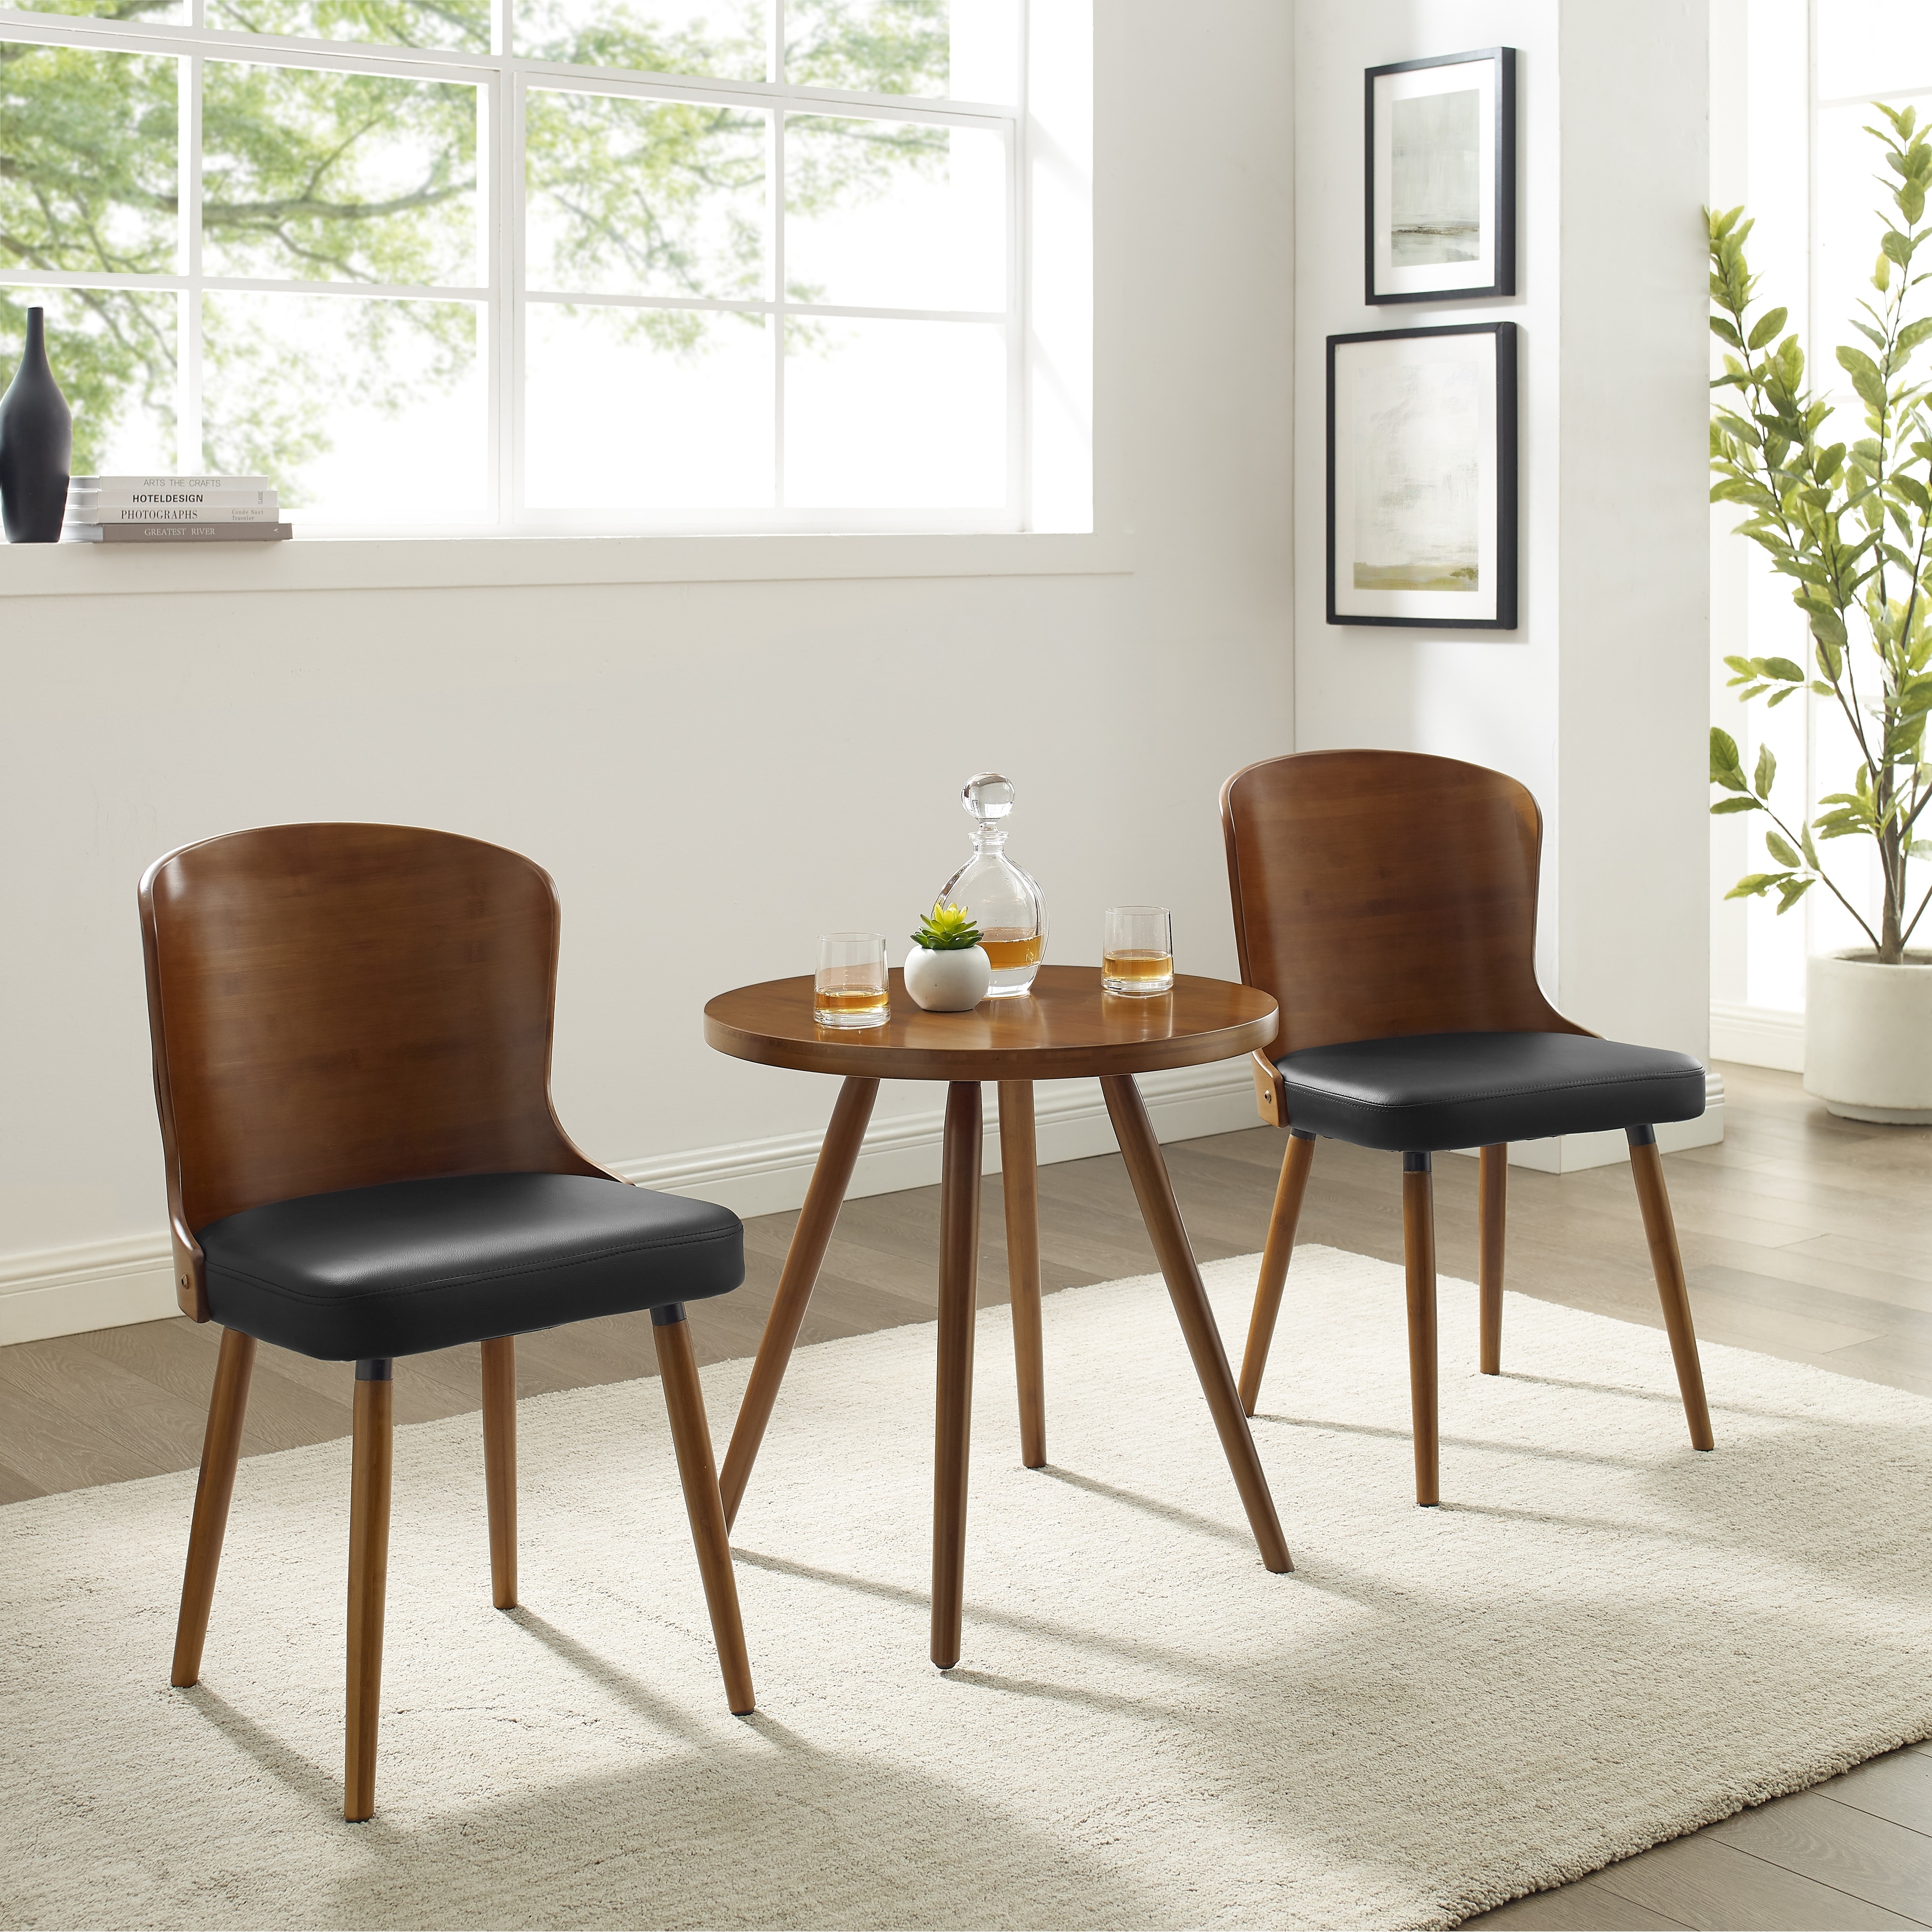 Corvus Calvados Mid Century Modern Dining Chairs Set Of 2 On Sale Overstock 18526096